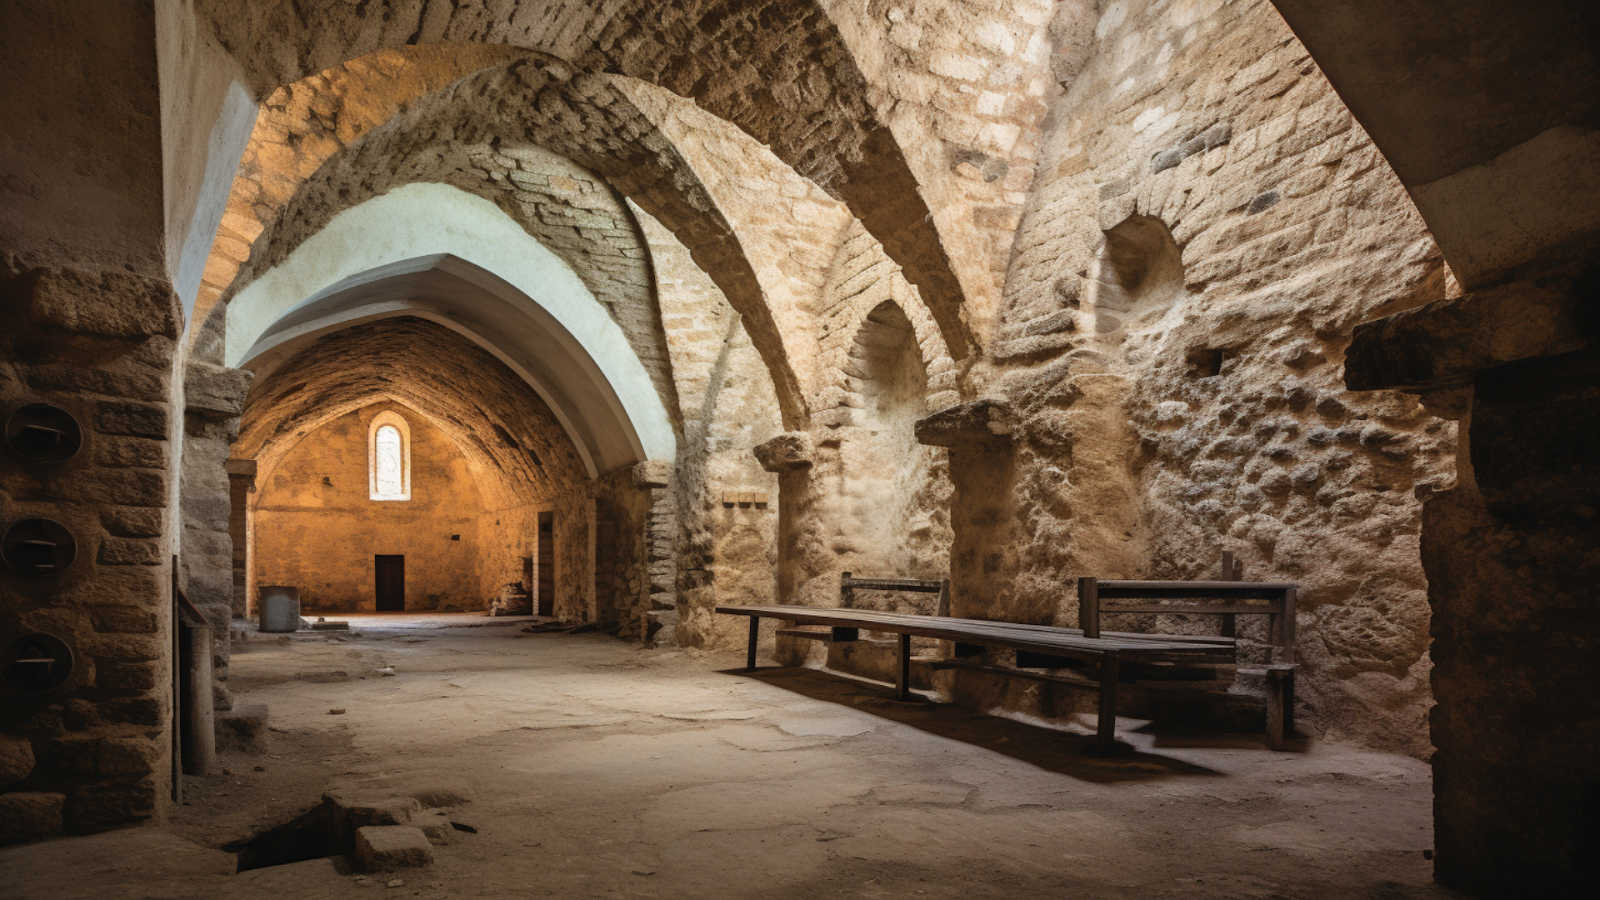 The atmospheric interior of the ancient Church of St. Donatus in Zadar, showcasing the enduring Romanesque architecture, a highlight for historic sites in Croatia.